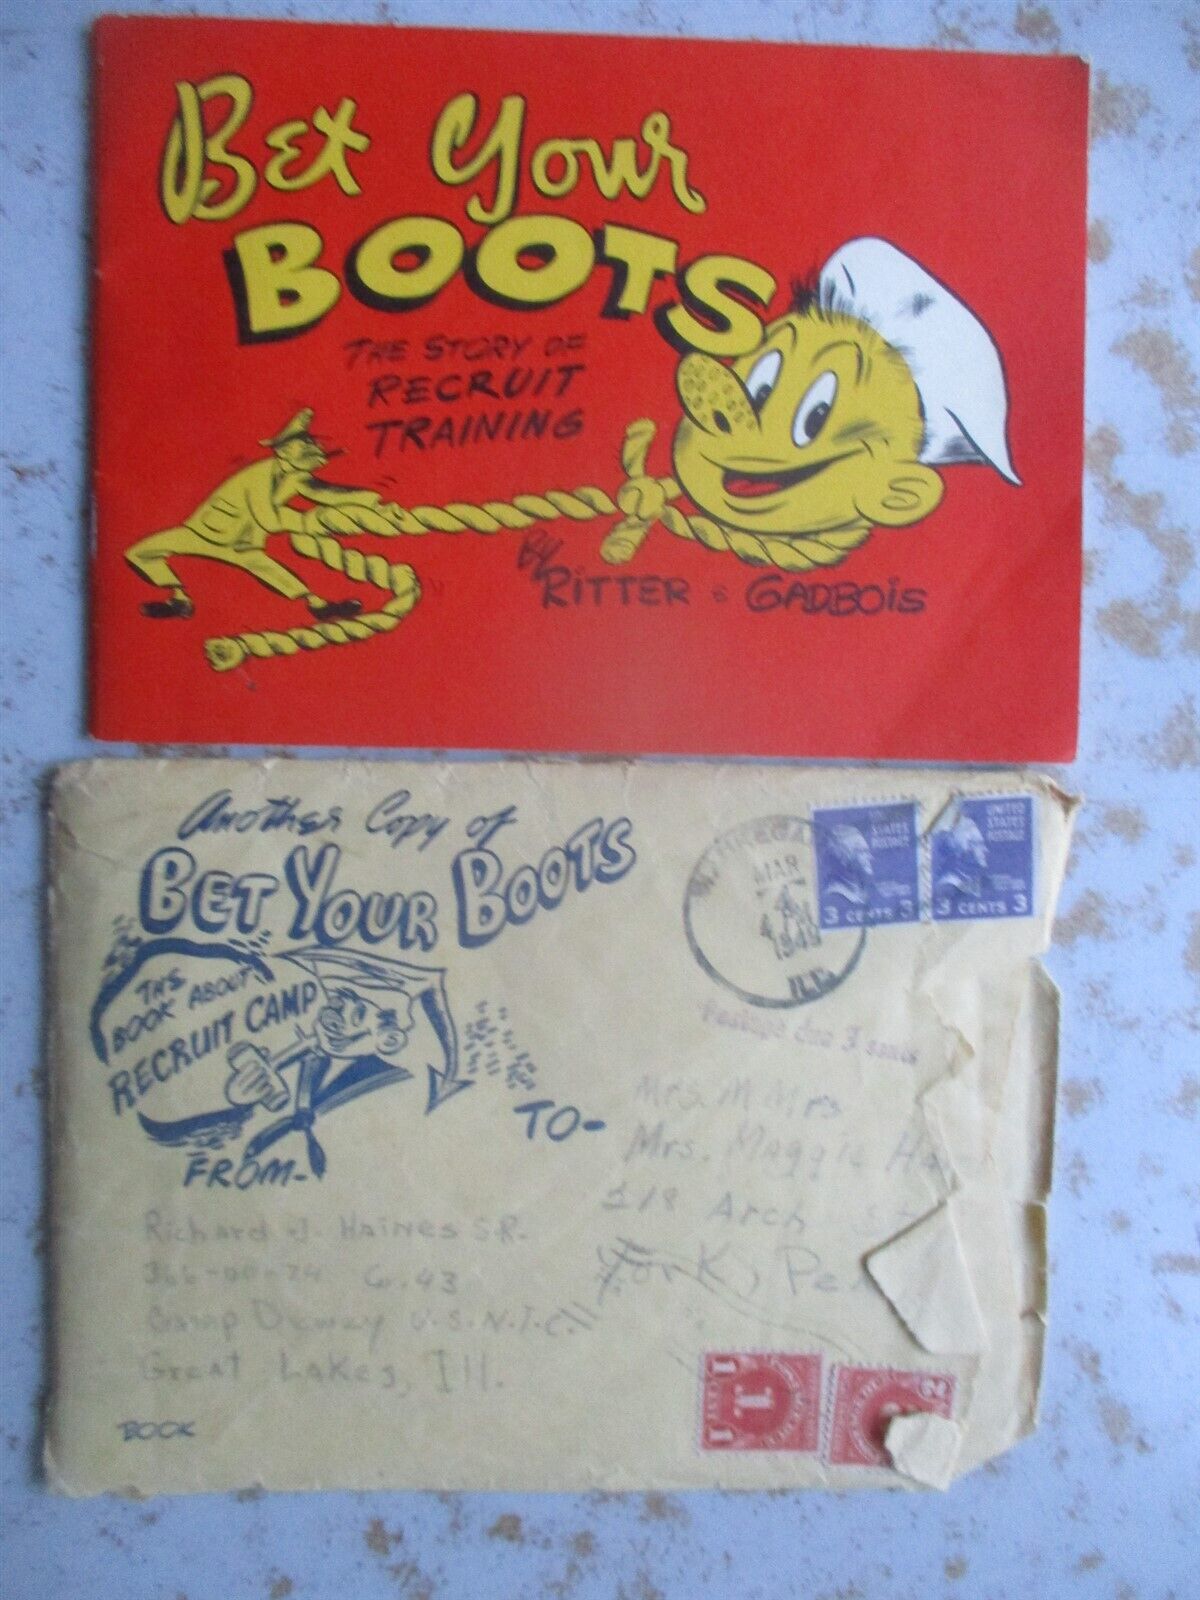 Bet Your Boots: The Story Of Recruit Training - 1949 Military Comic Booklet